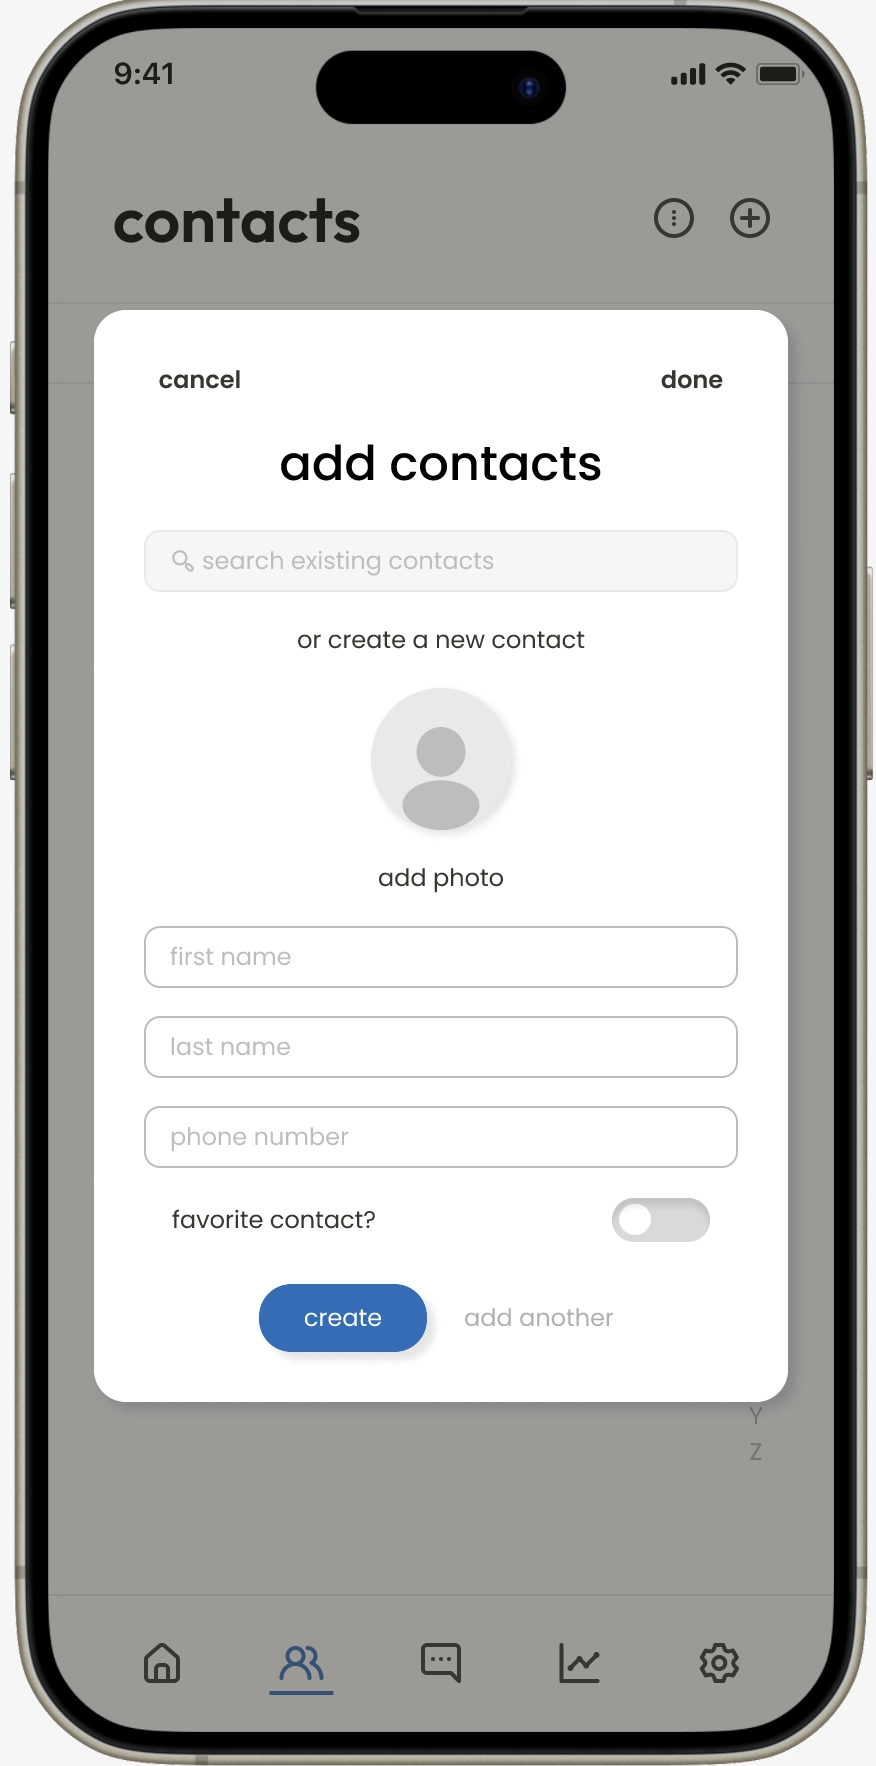 Add new contact page. Enter name and phone number.